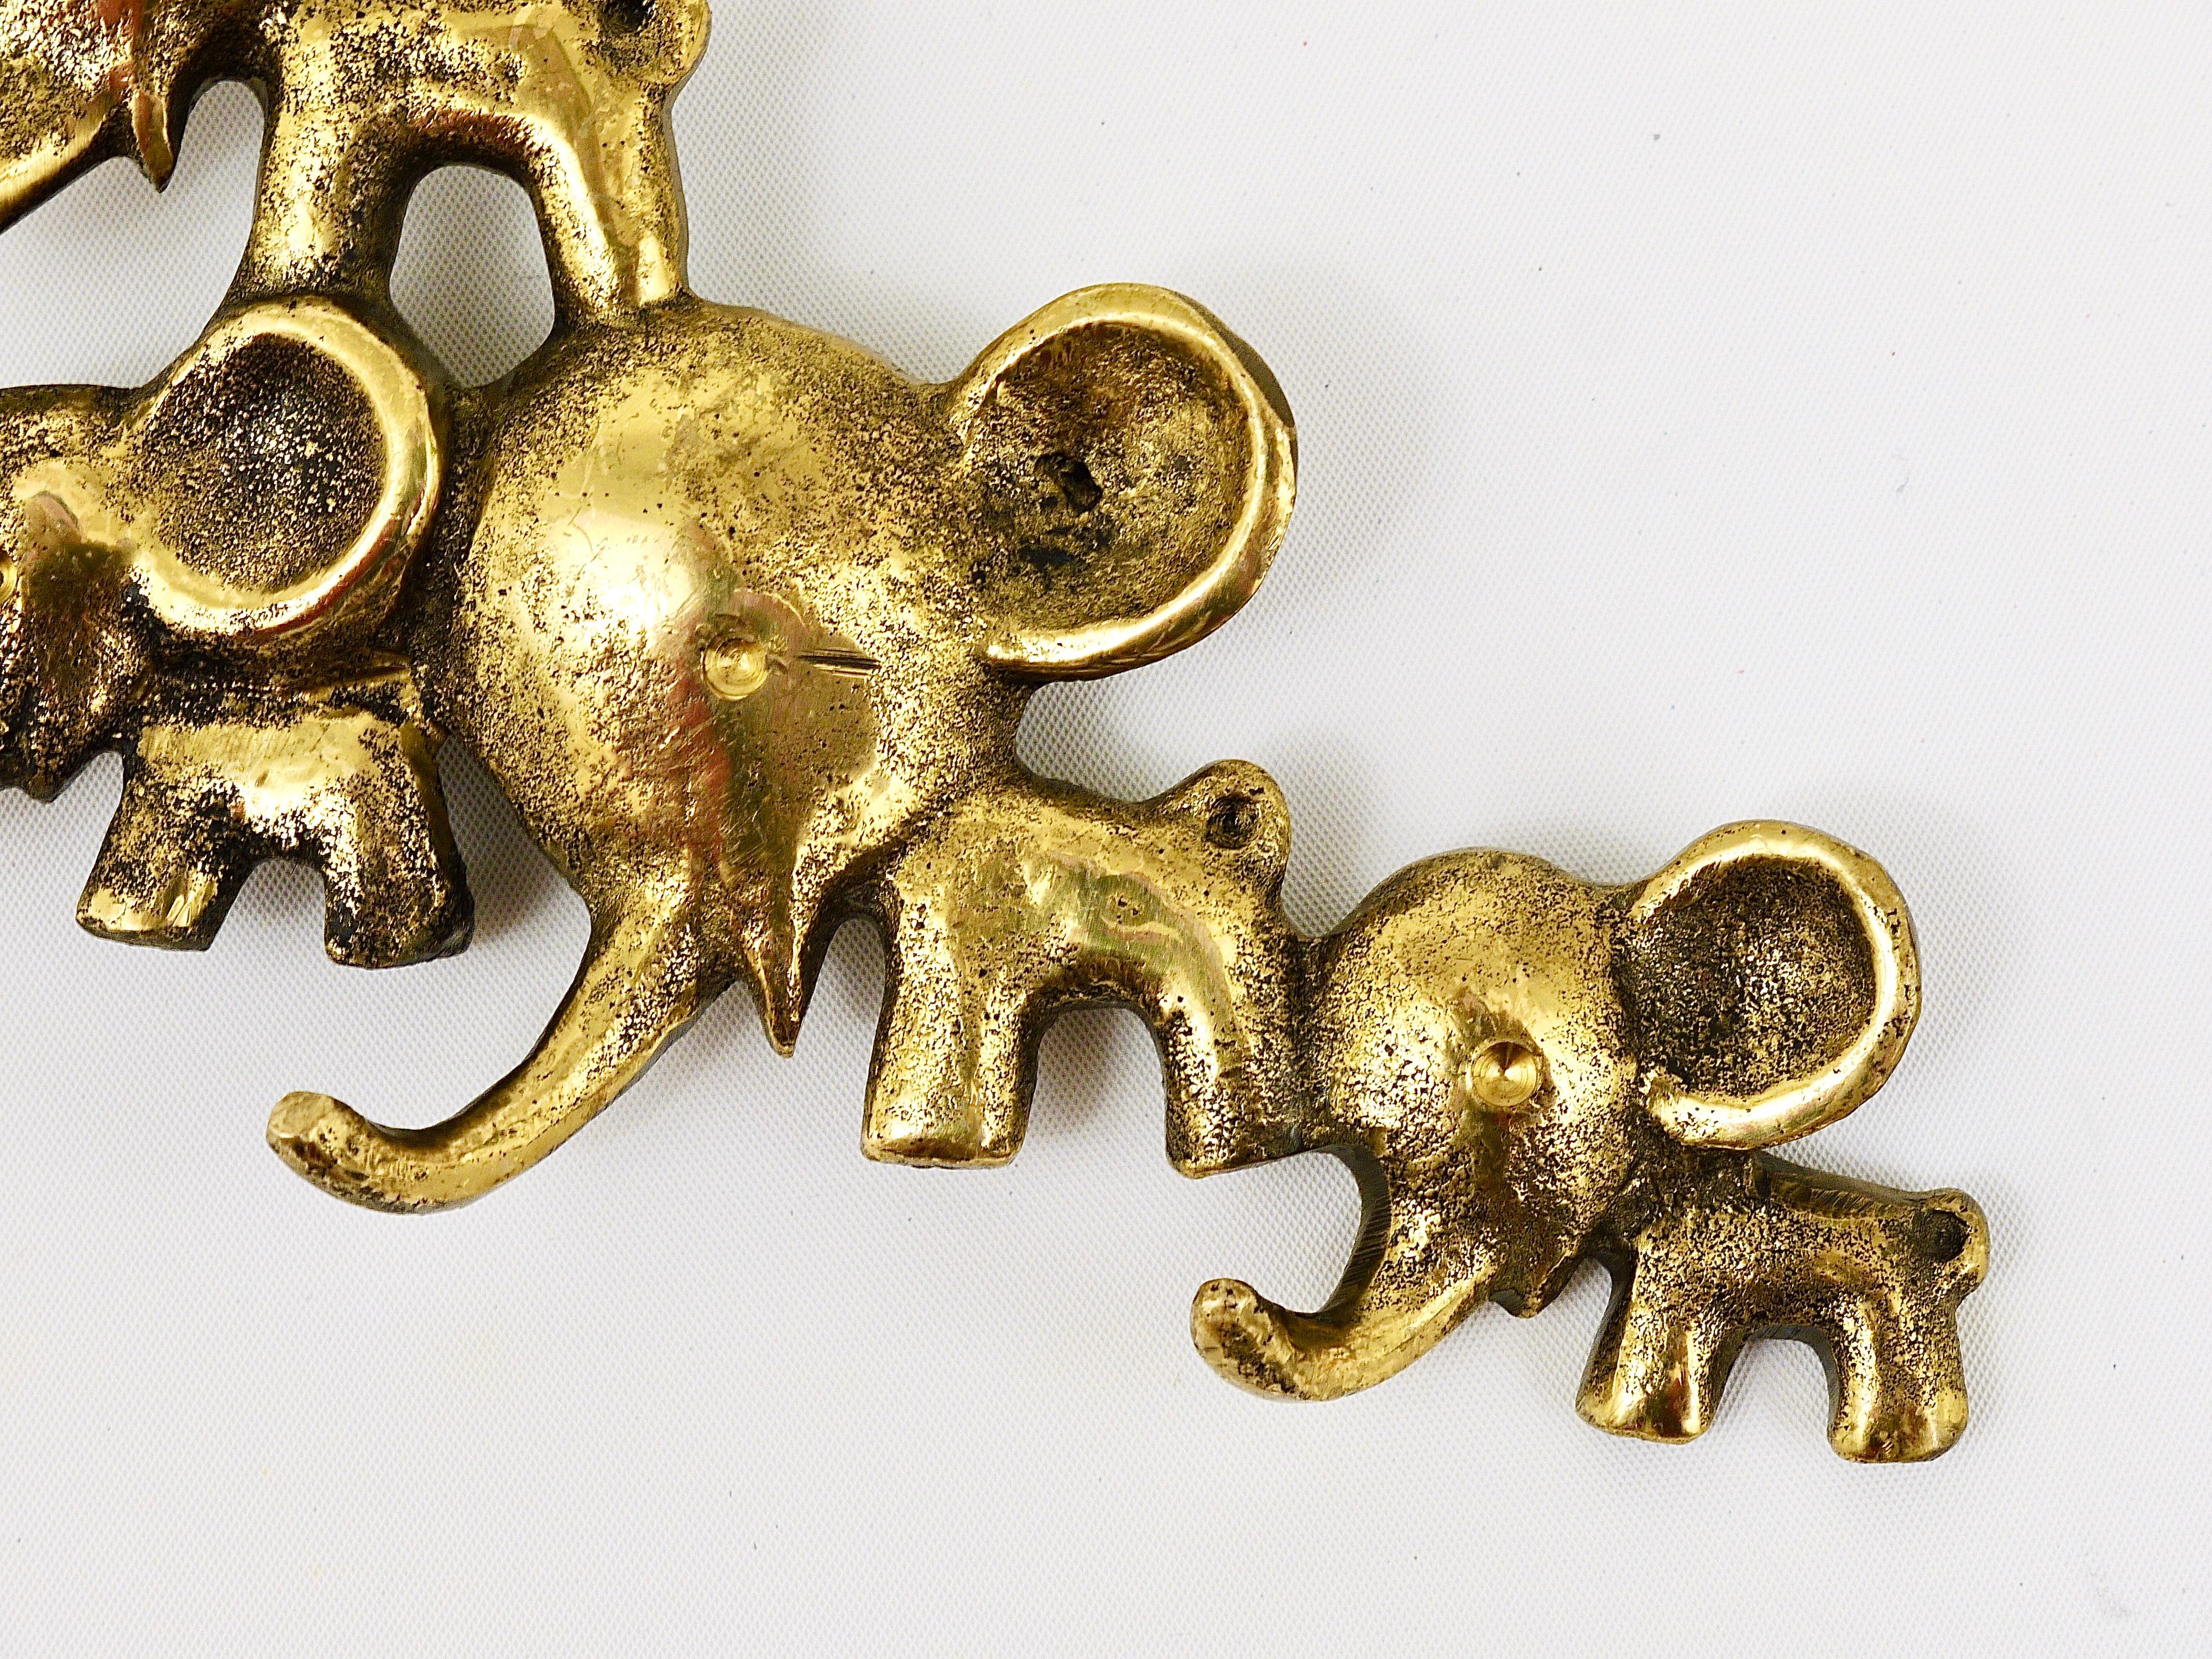 A charming and rare key holder, displaying five elephants in different sizes. A very humorous design by Walter Bosse, executed by Herta Baller, Austria, in the 1950s. Also suitable as a towel holder or for dish towels in the kitchen. Made of brass,